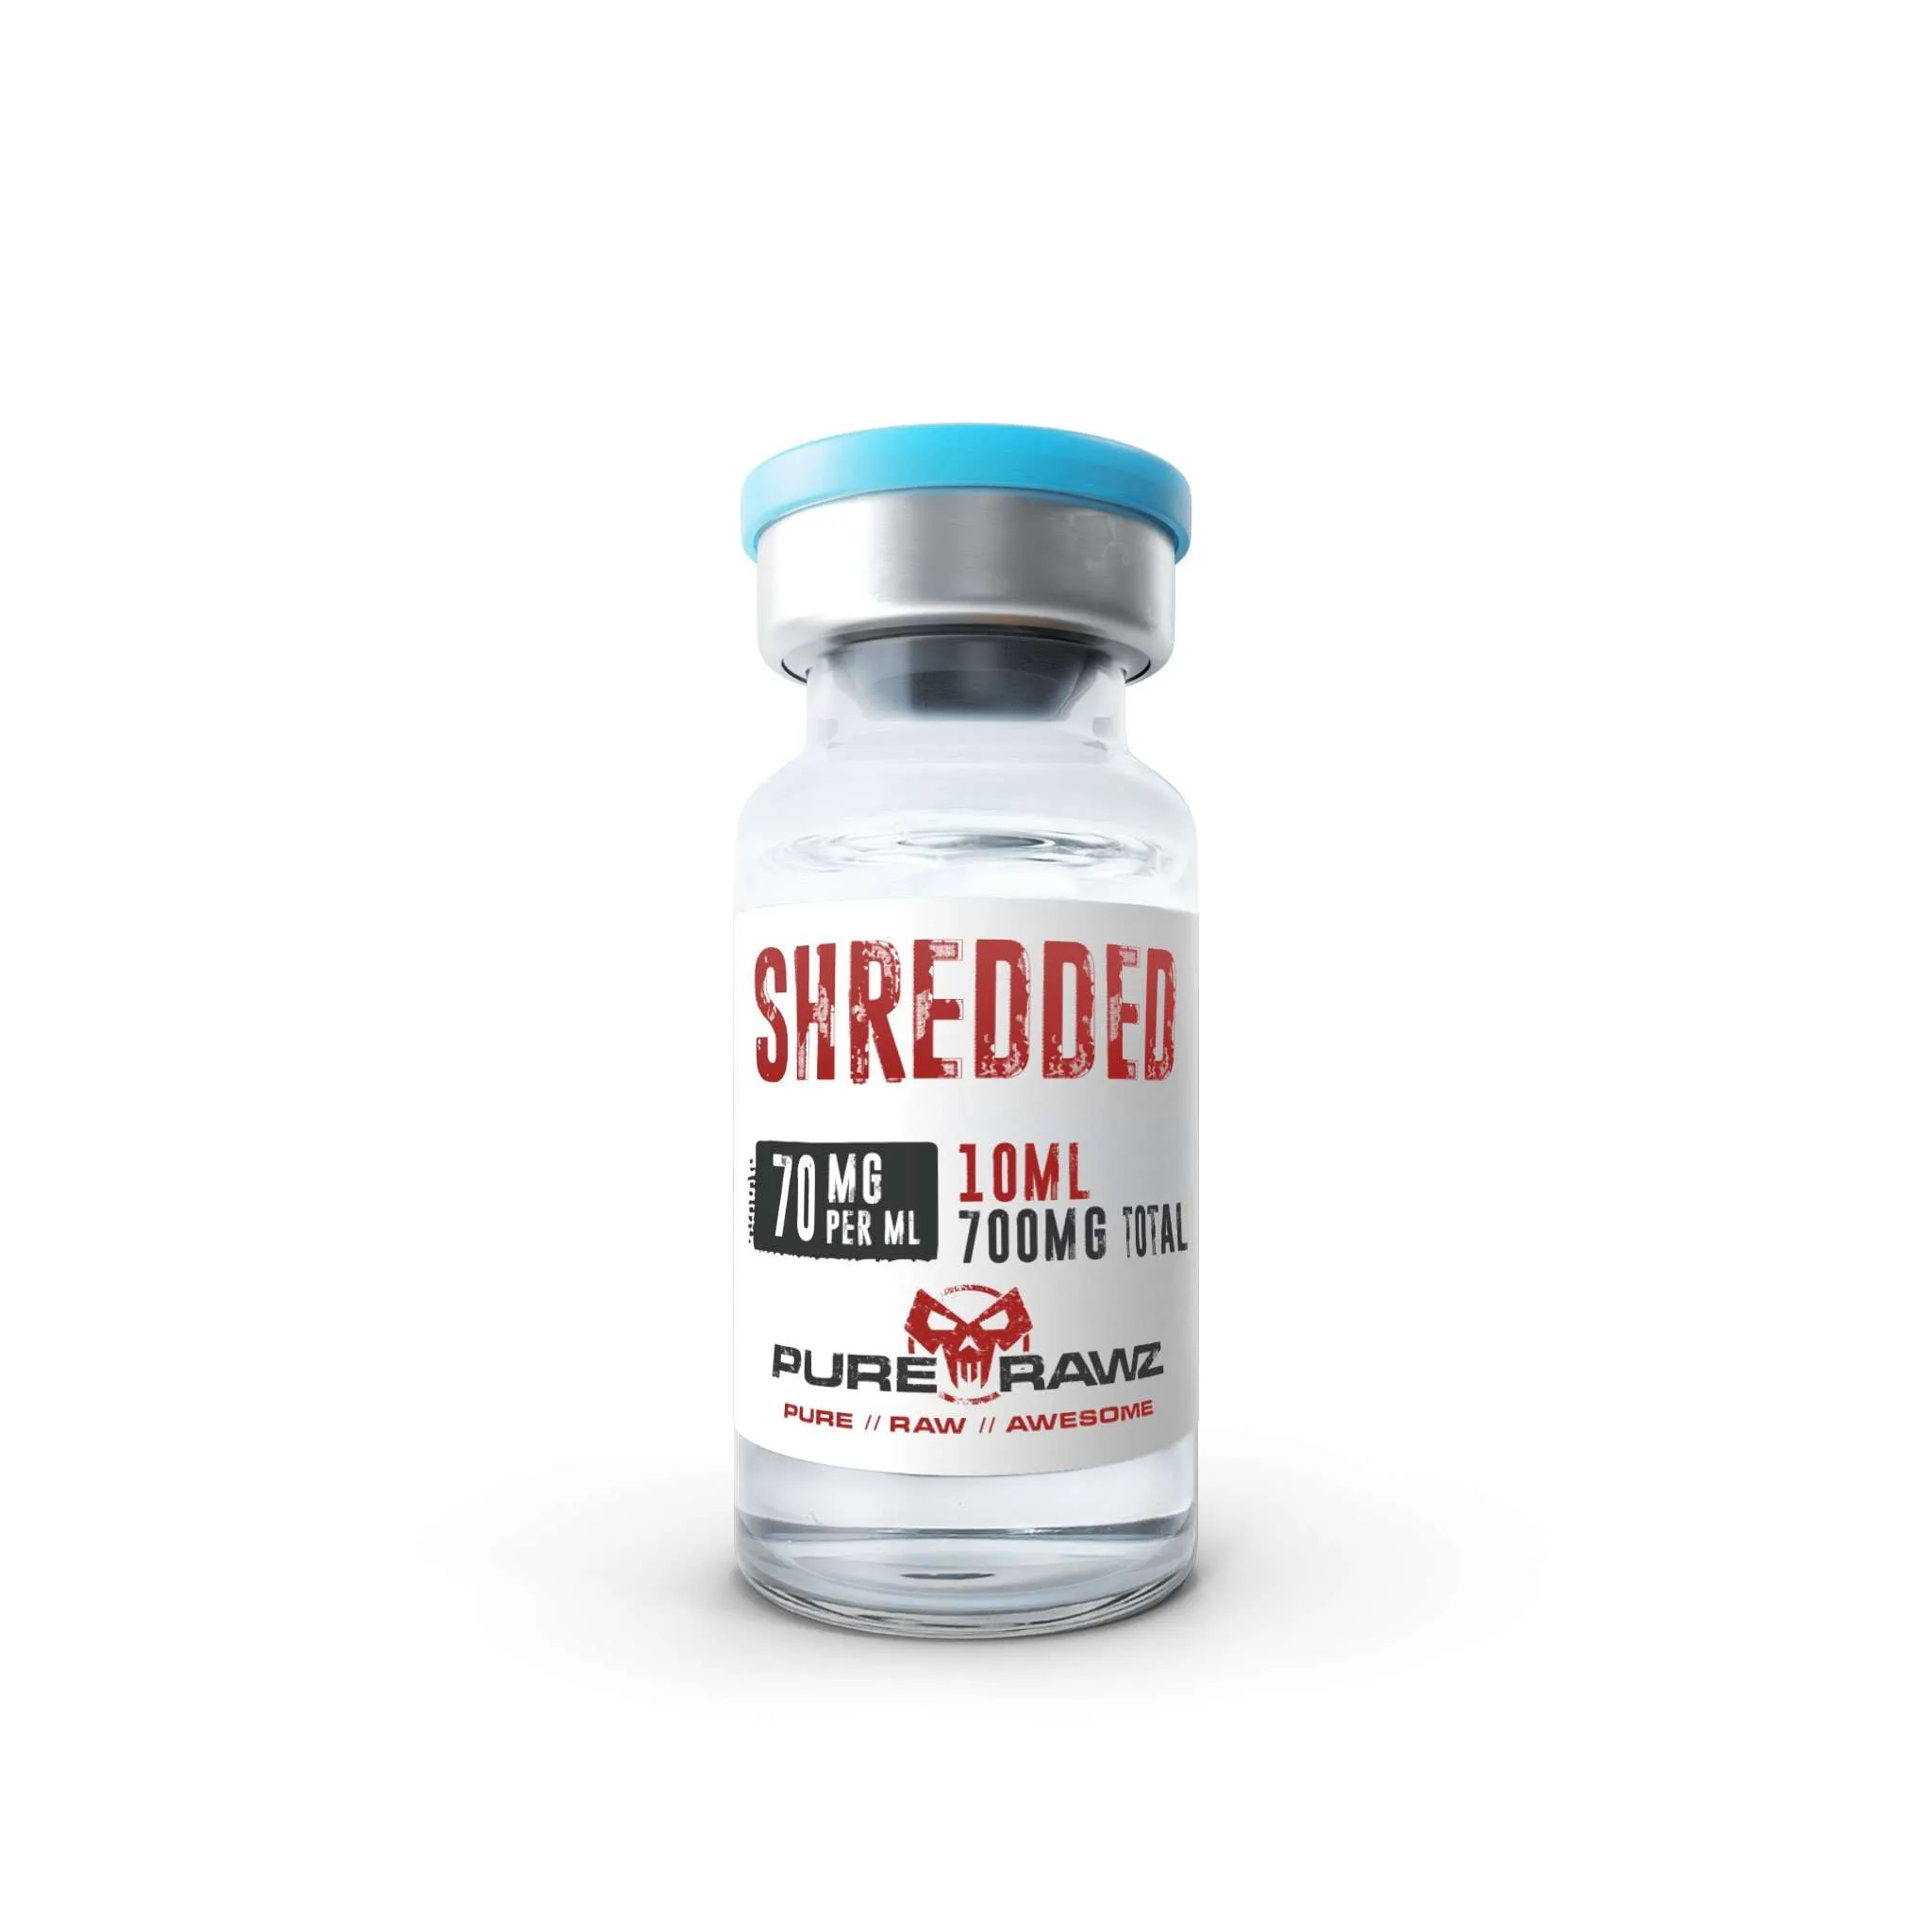 Shredded Injectable